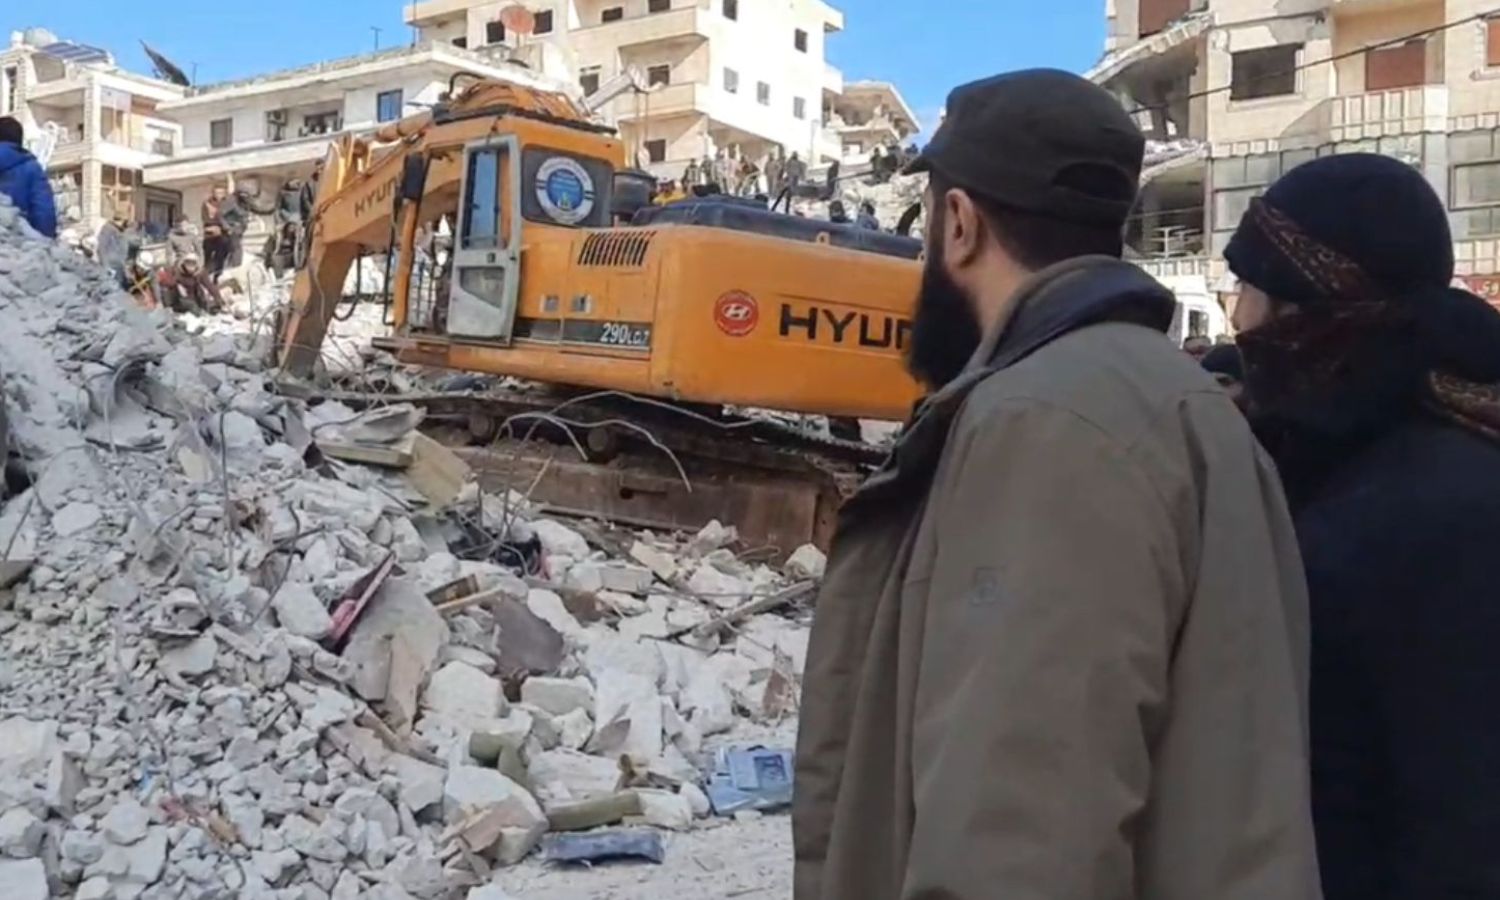 The leader of Hayat Tahrir al-Sham, Abu Mohammad al-Jolani, during a visit to the city of Salqin in rural Idlib, which was damaged by an earthquake that struck northwestern Syria - February 7, 2023 (“Al-Murasel al-Askari” The Military Correspondent)